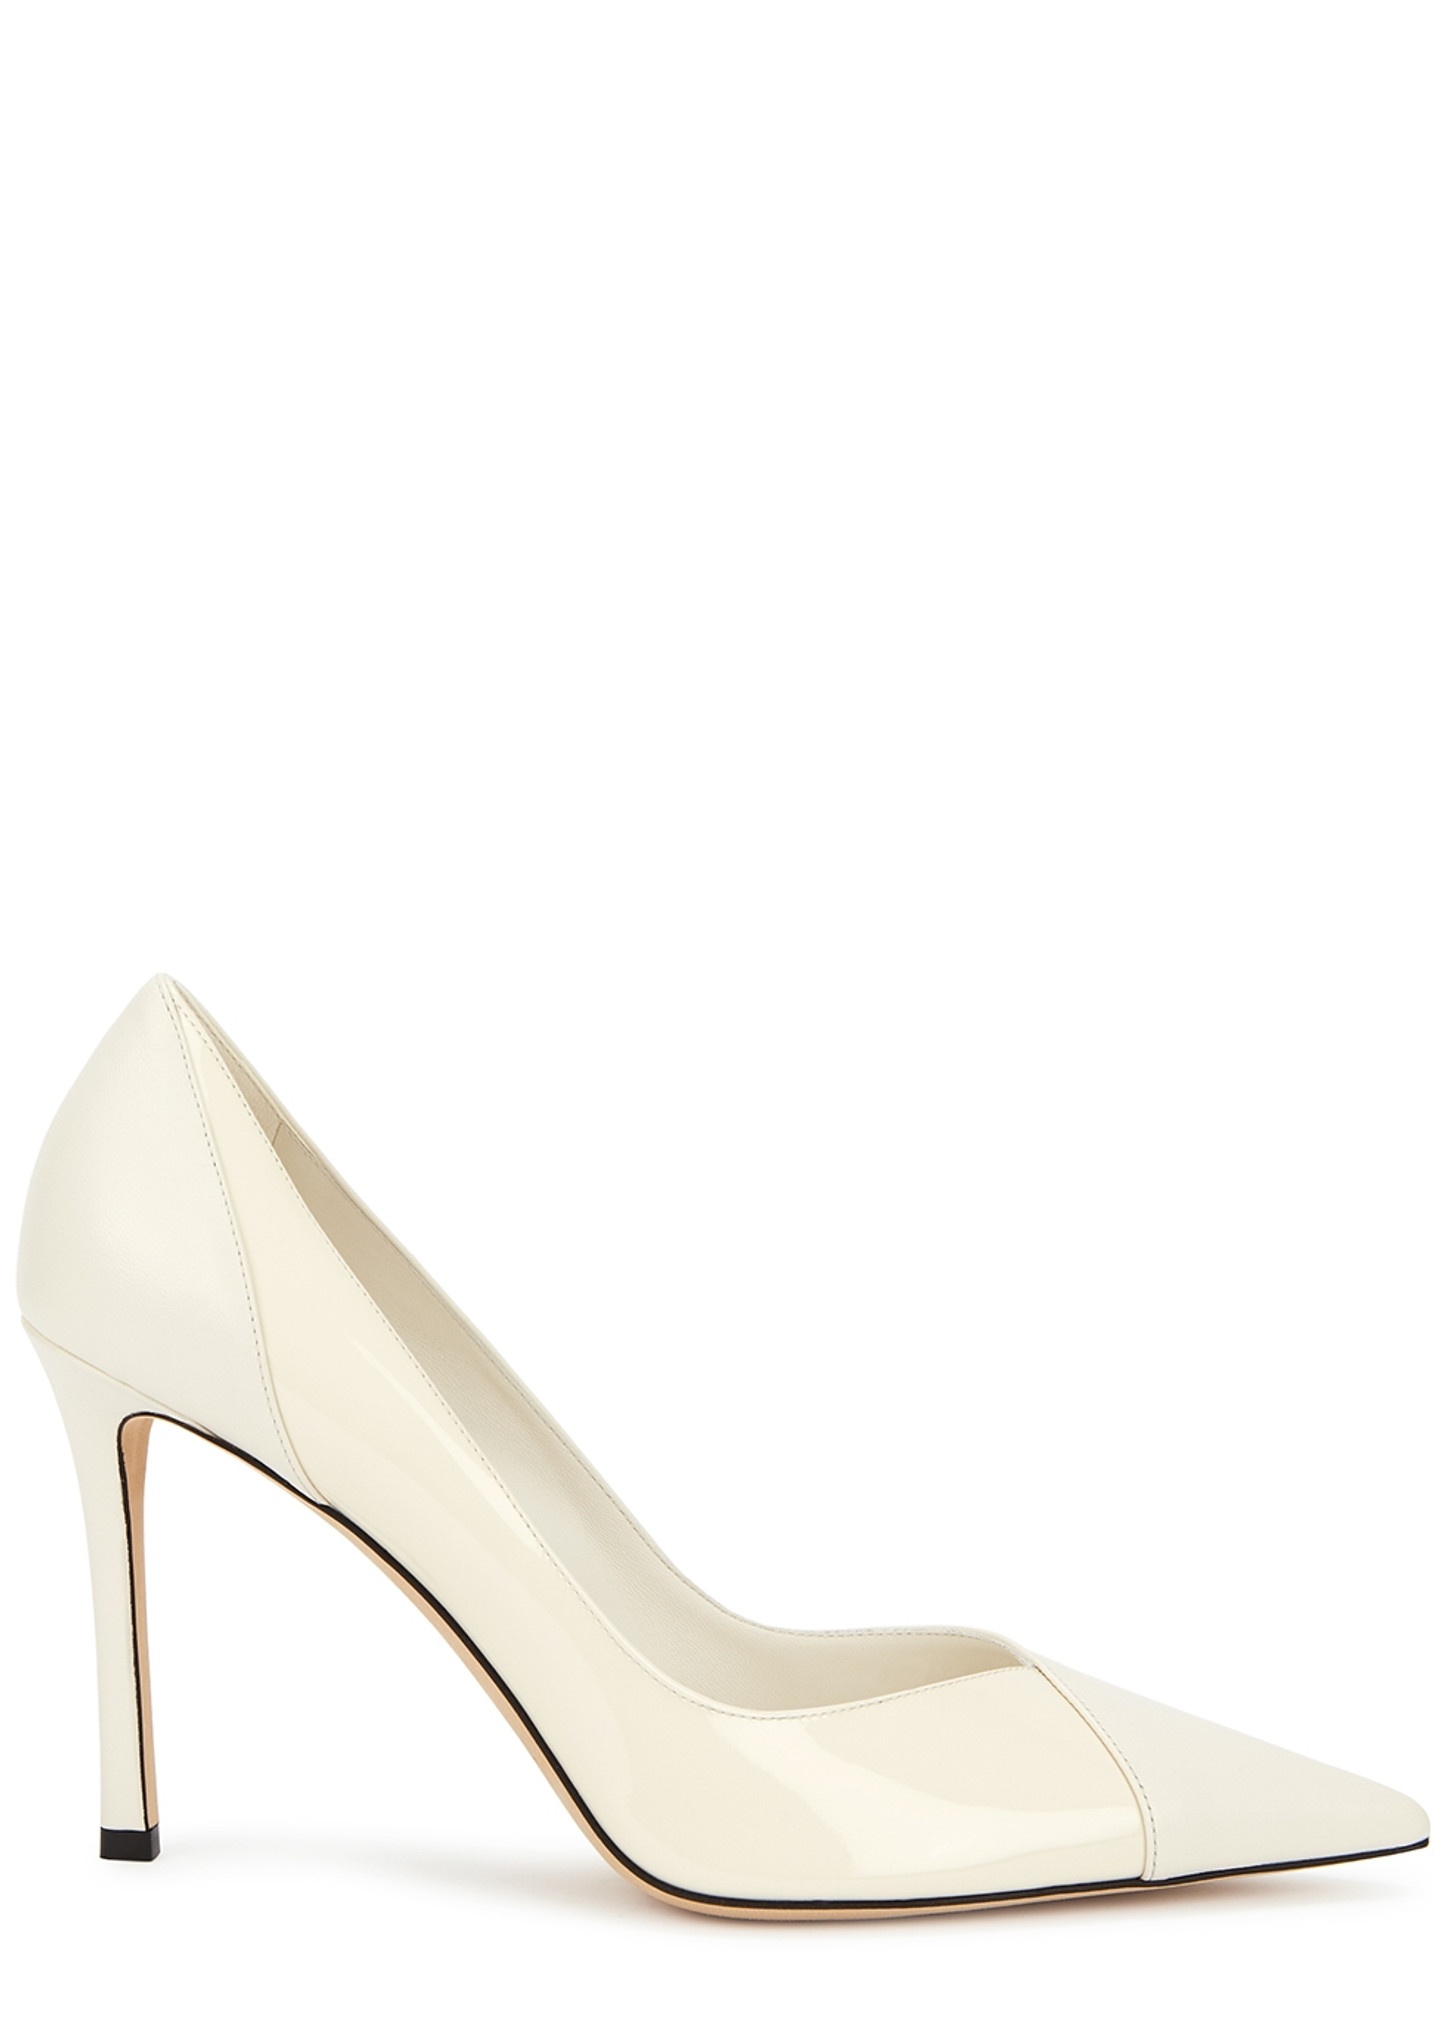 Cass 95 off-white leather pumps - 1